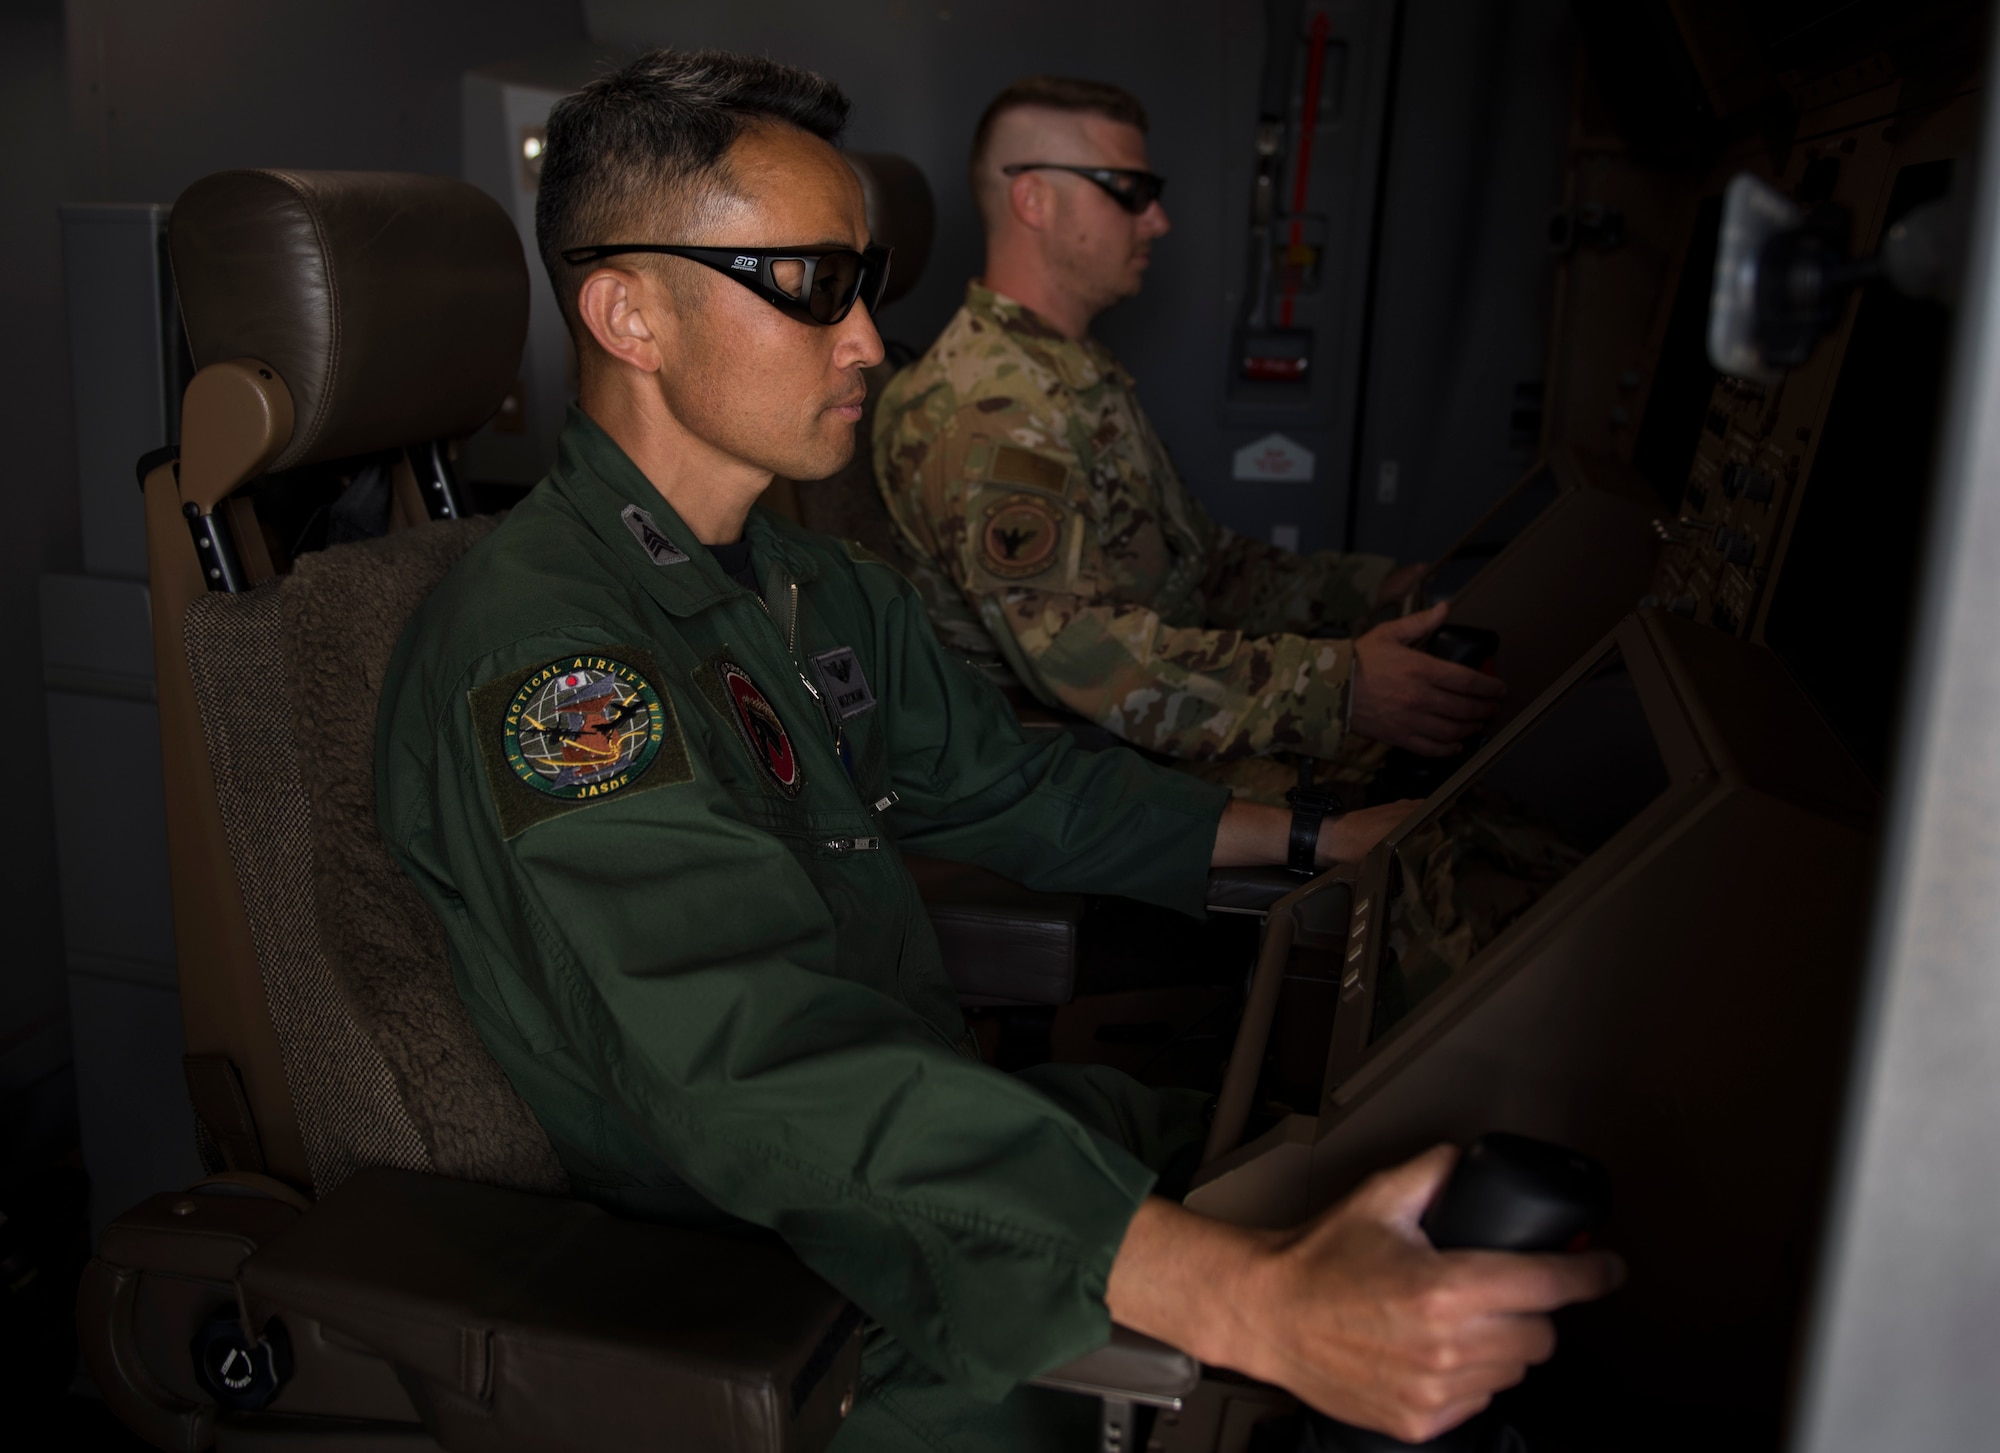 Japan Air Self-Defense Force Chief Master Sgt. Teruyuki Mizokami, 405th Air Refueling Squadron senior boom-operator, simulates operating a KC-46 Pegasus boom, May 13, 2021, at Altus Air Force Base, Oklahoma. The KC-46 boom operator is seated in the front of the aircraft while operating the boom instead of in the back as with other refuelers, such as the KC-135 and KC-10. (U.S. Air Force photo by Airman 1st Class Amanda Lovelace)